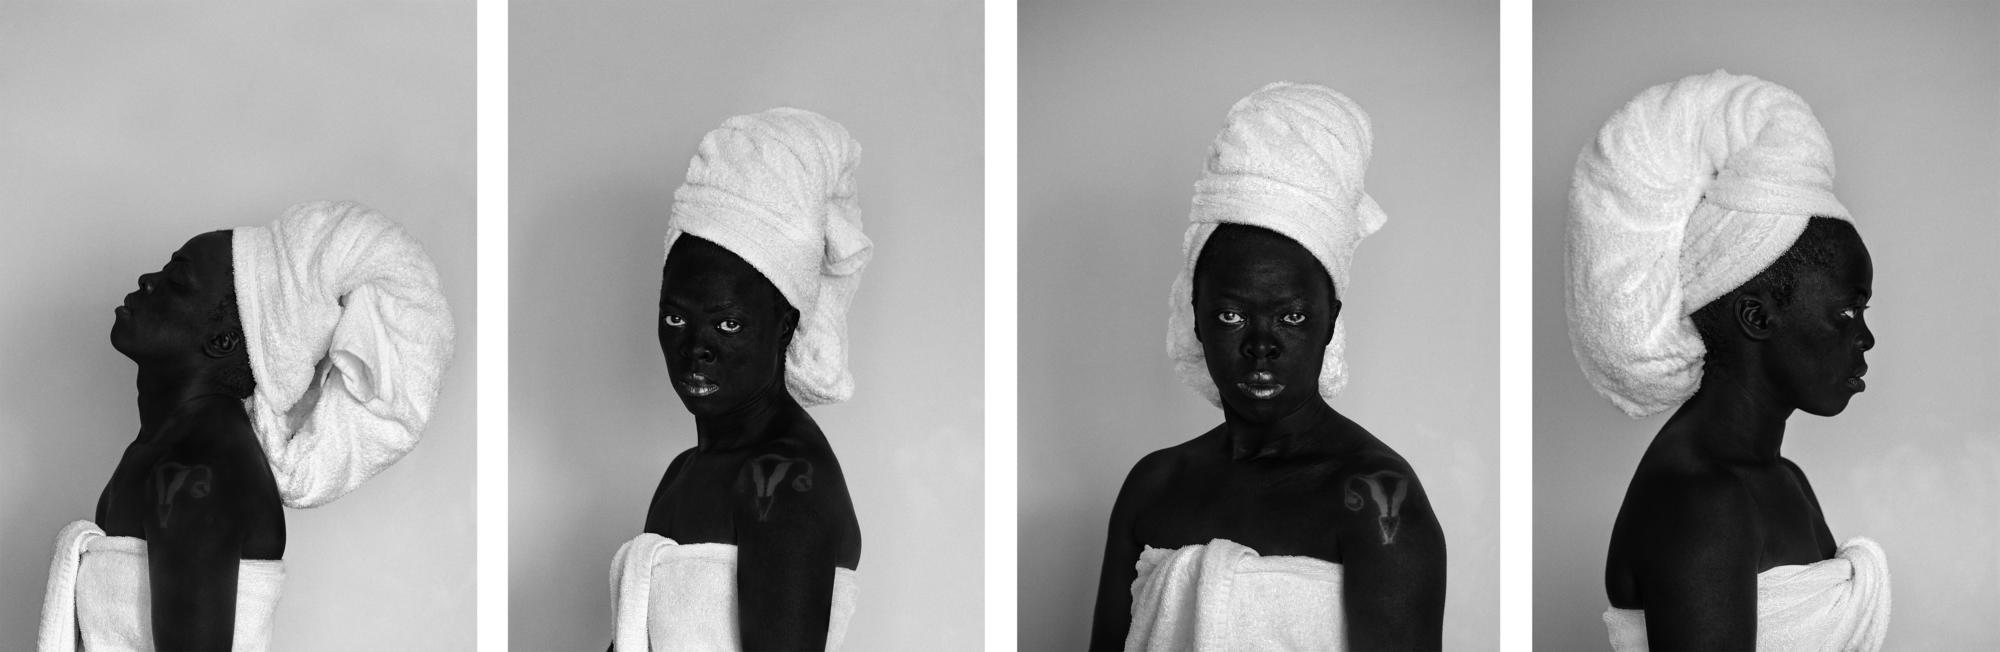 Four images of a person in black and white with a towel around their body and head.